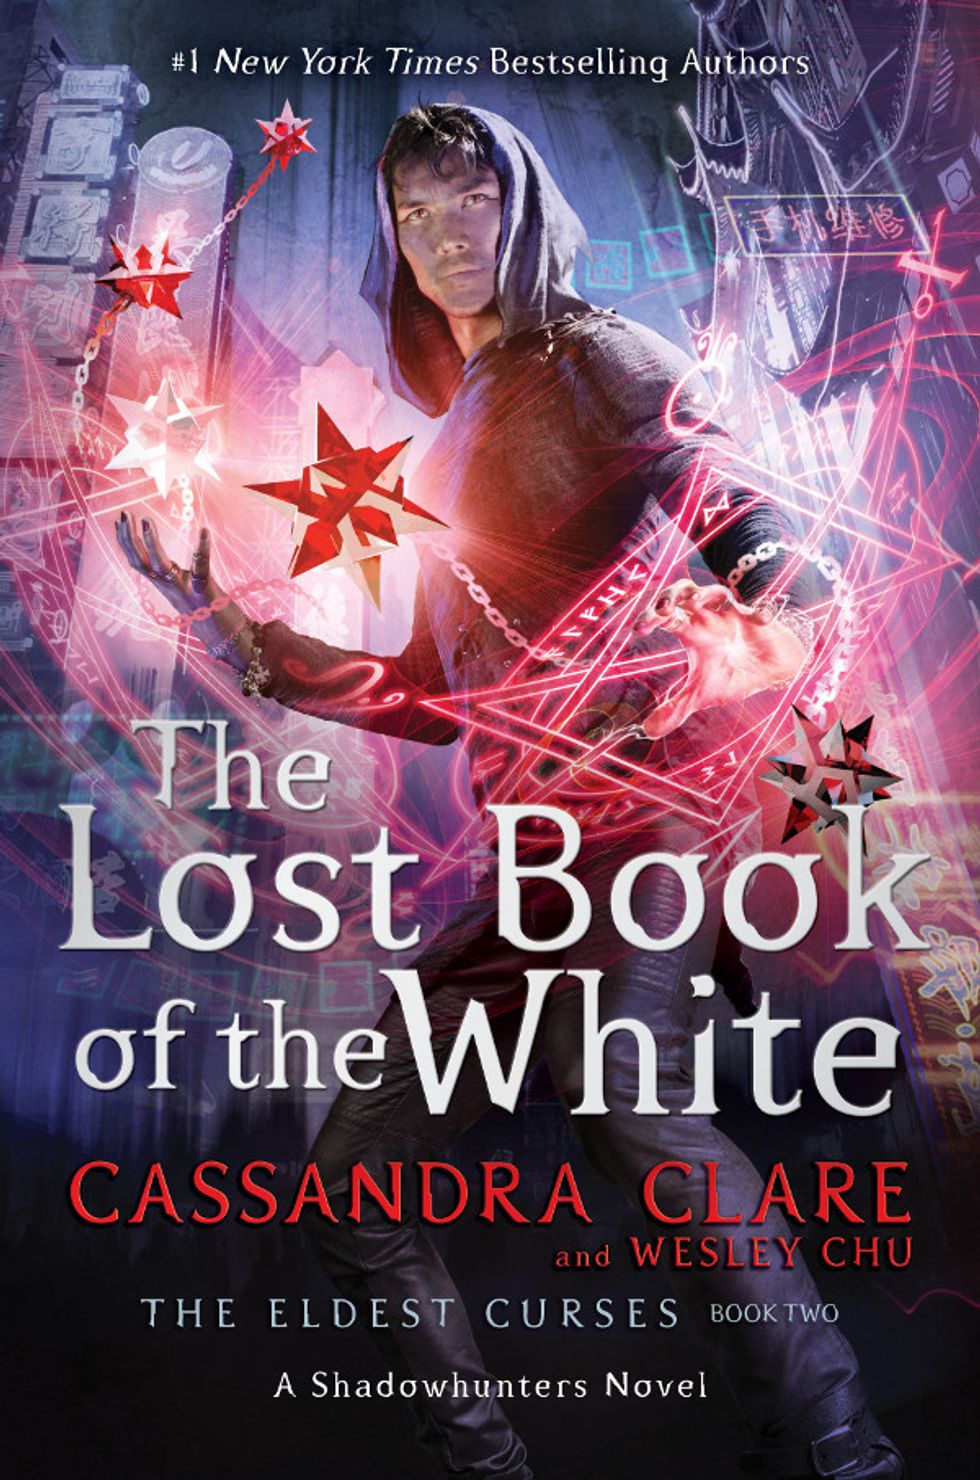 The Lost Book of the White: REVIEW